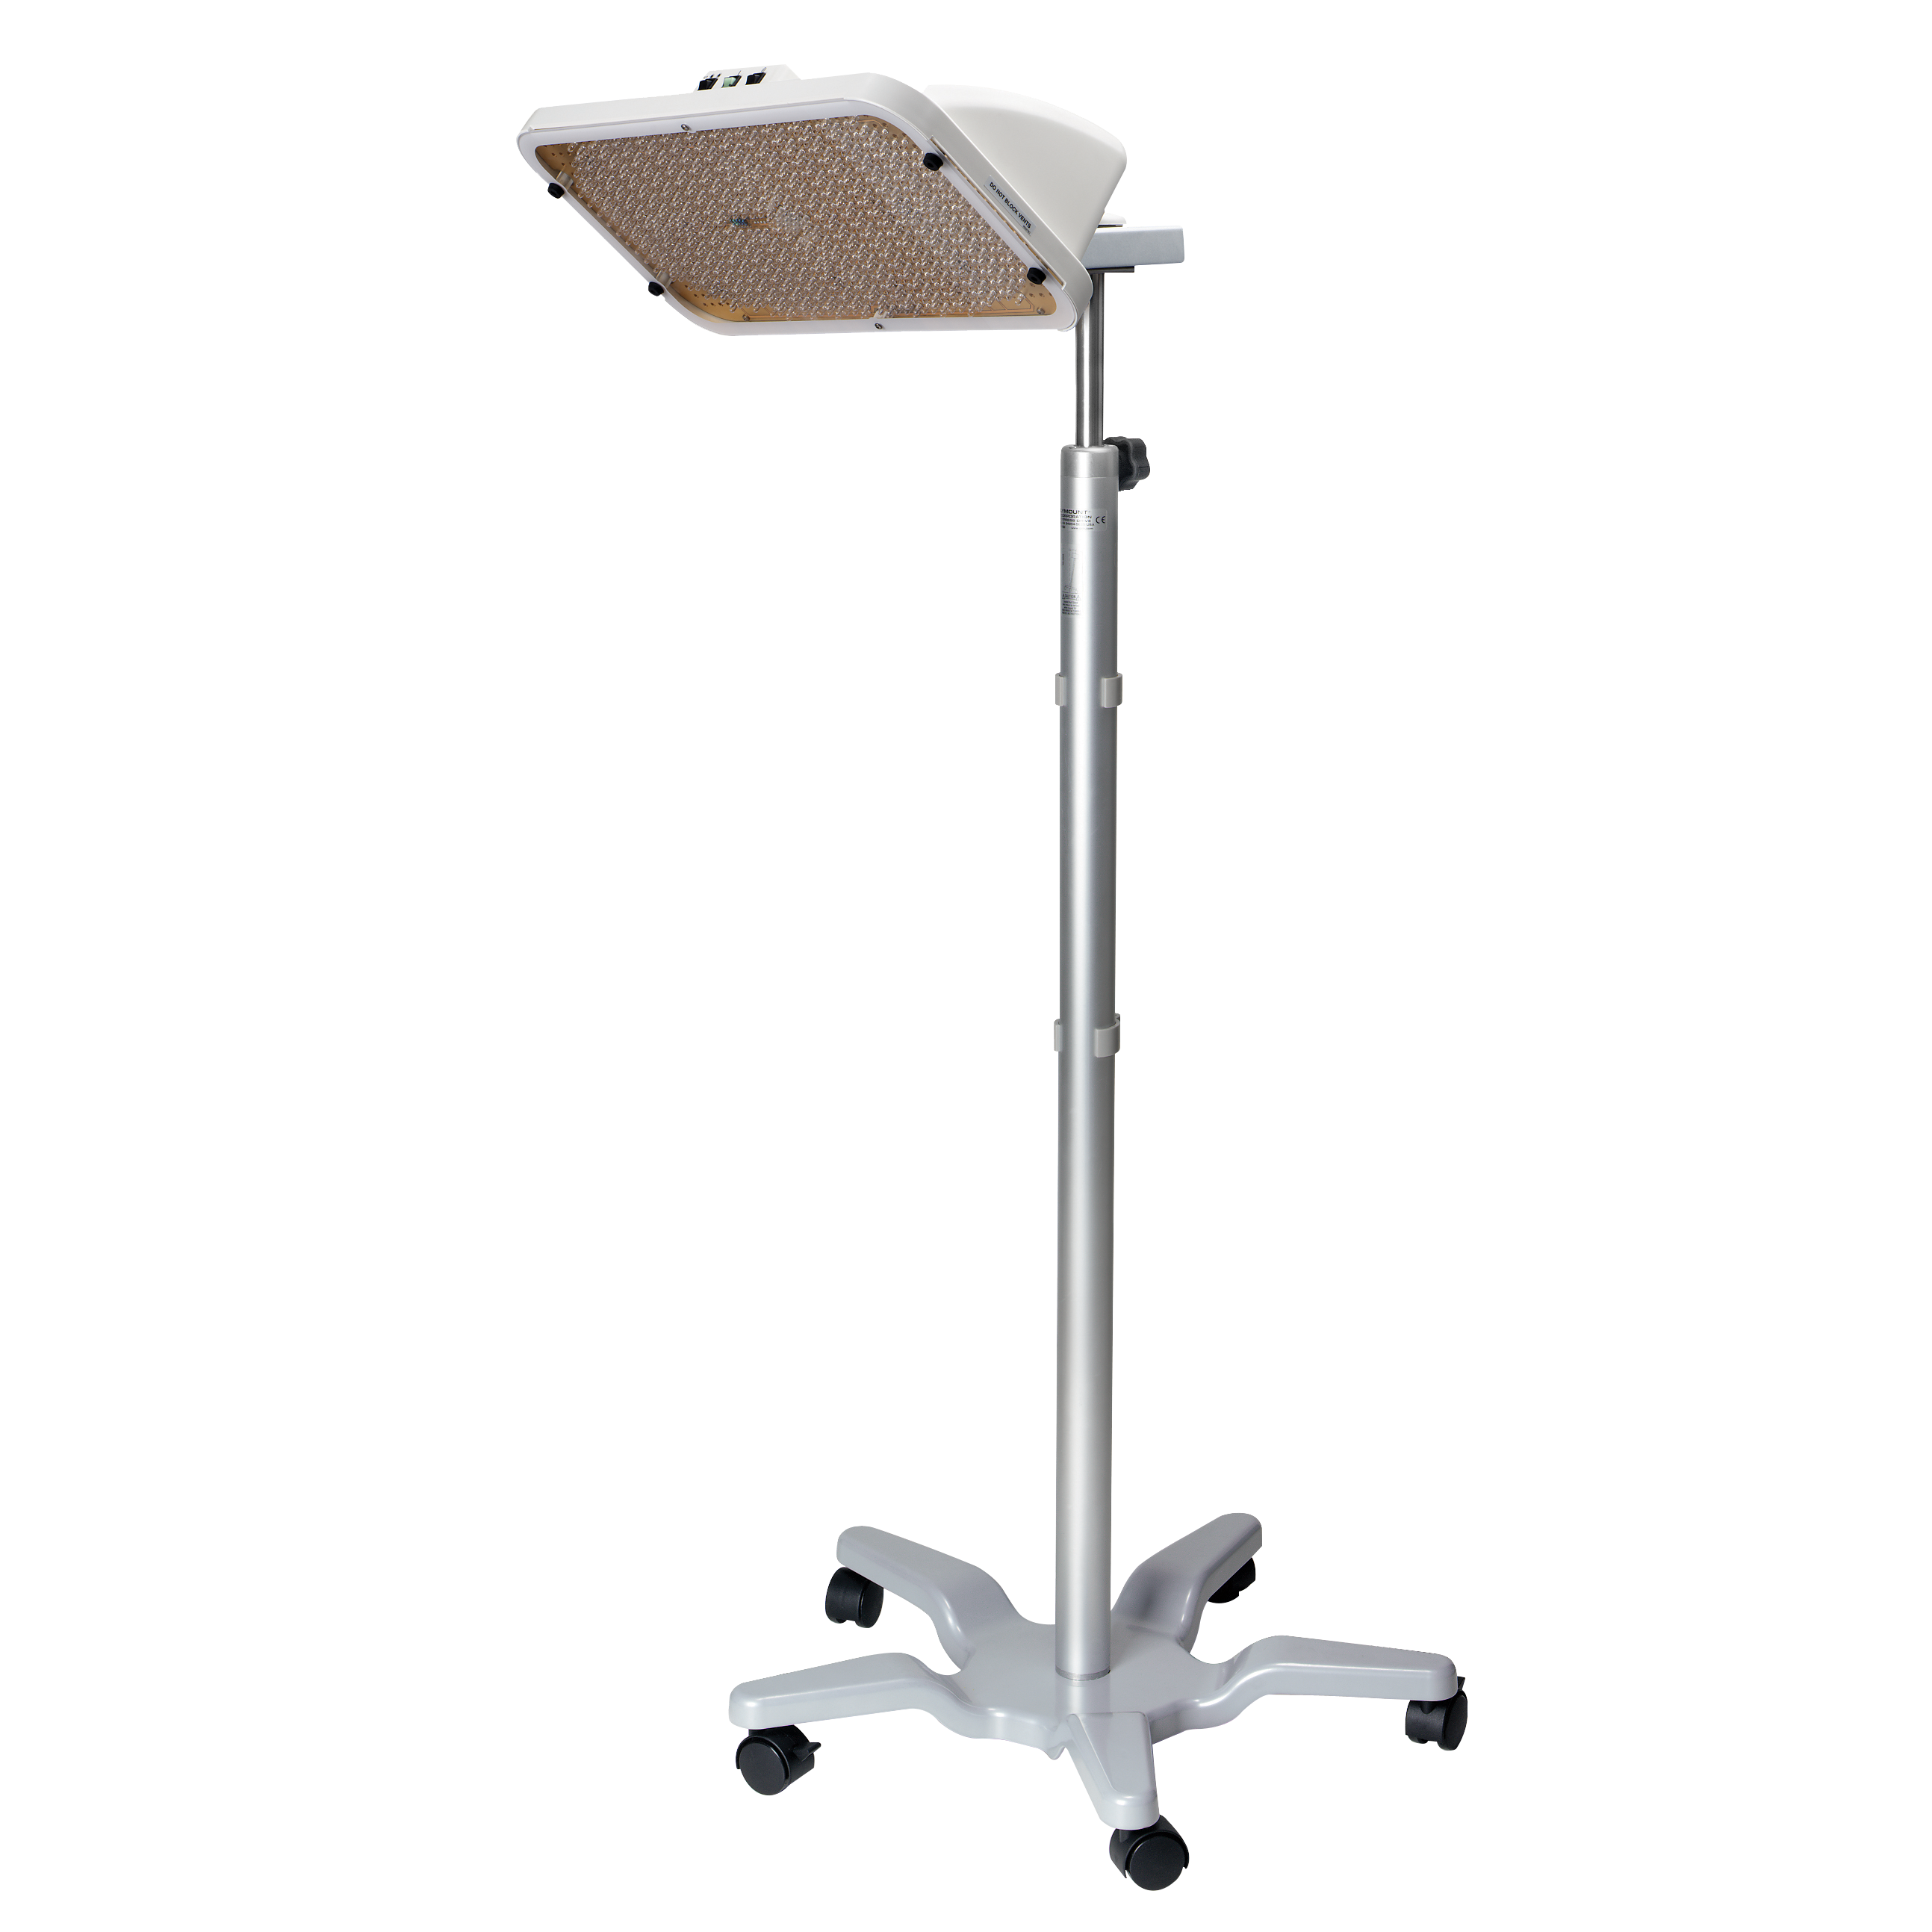 Neoblue Led Phototherapy System